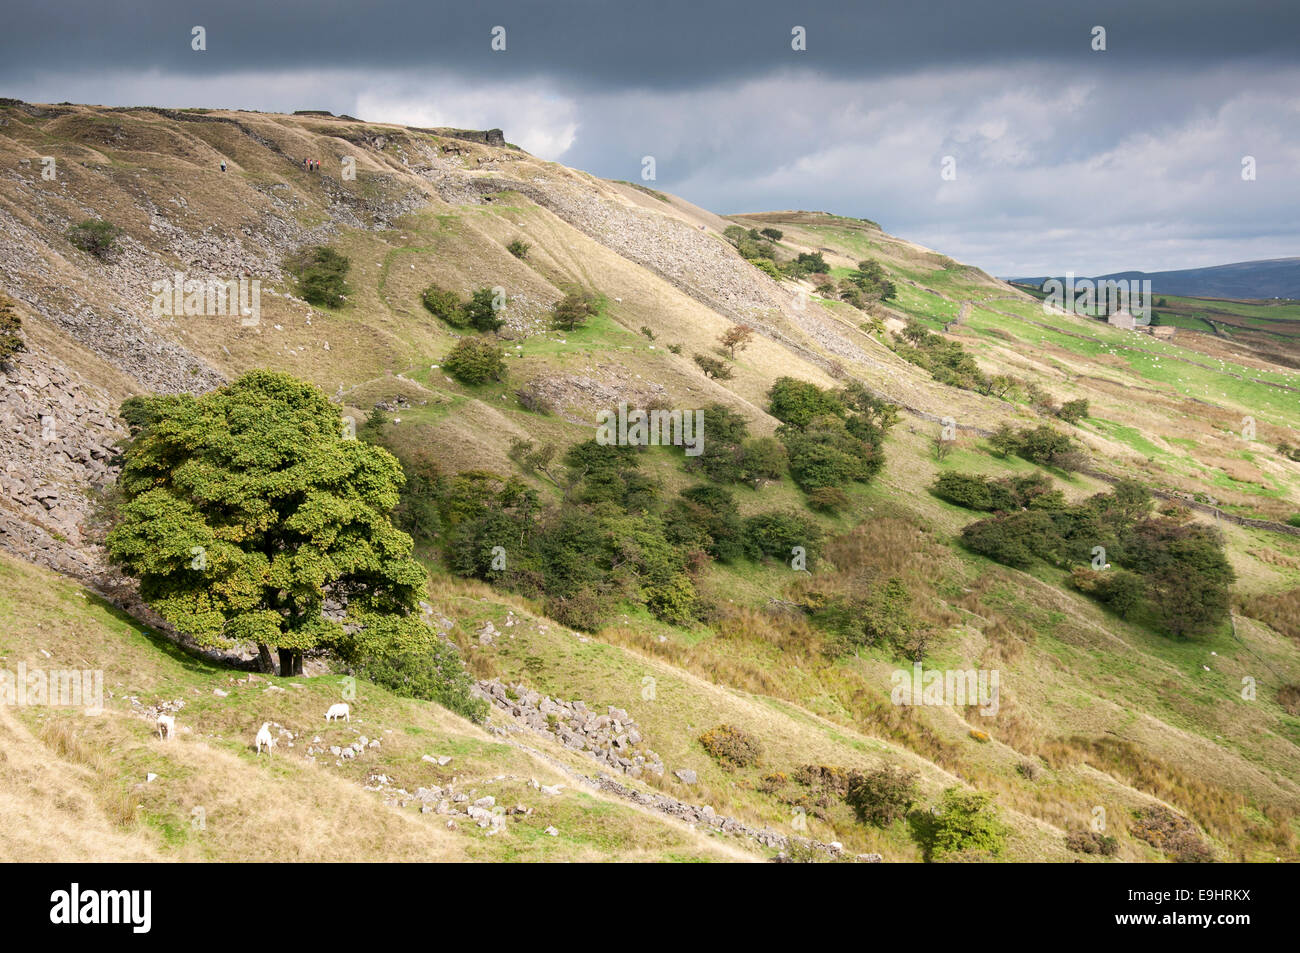 Cracken edge quarries near Chinley in Derbyshire. Sunlight on the slopes of the hill with a dark sky overhead. Stock Photo